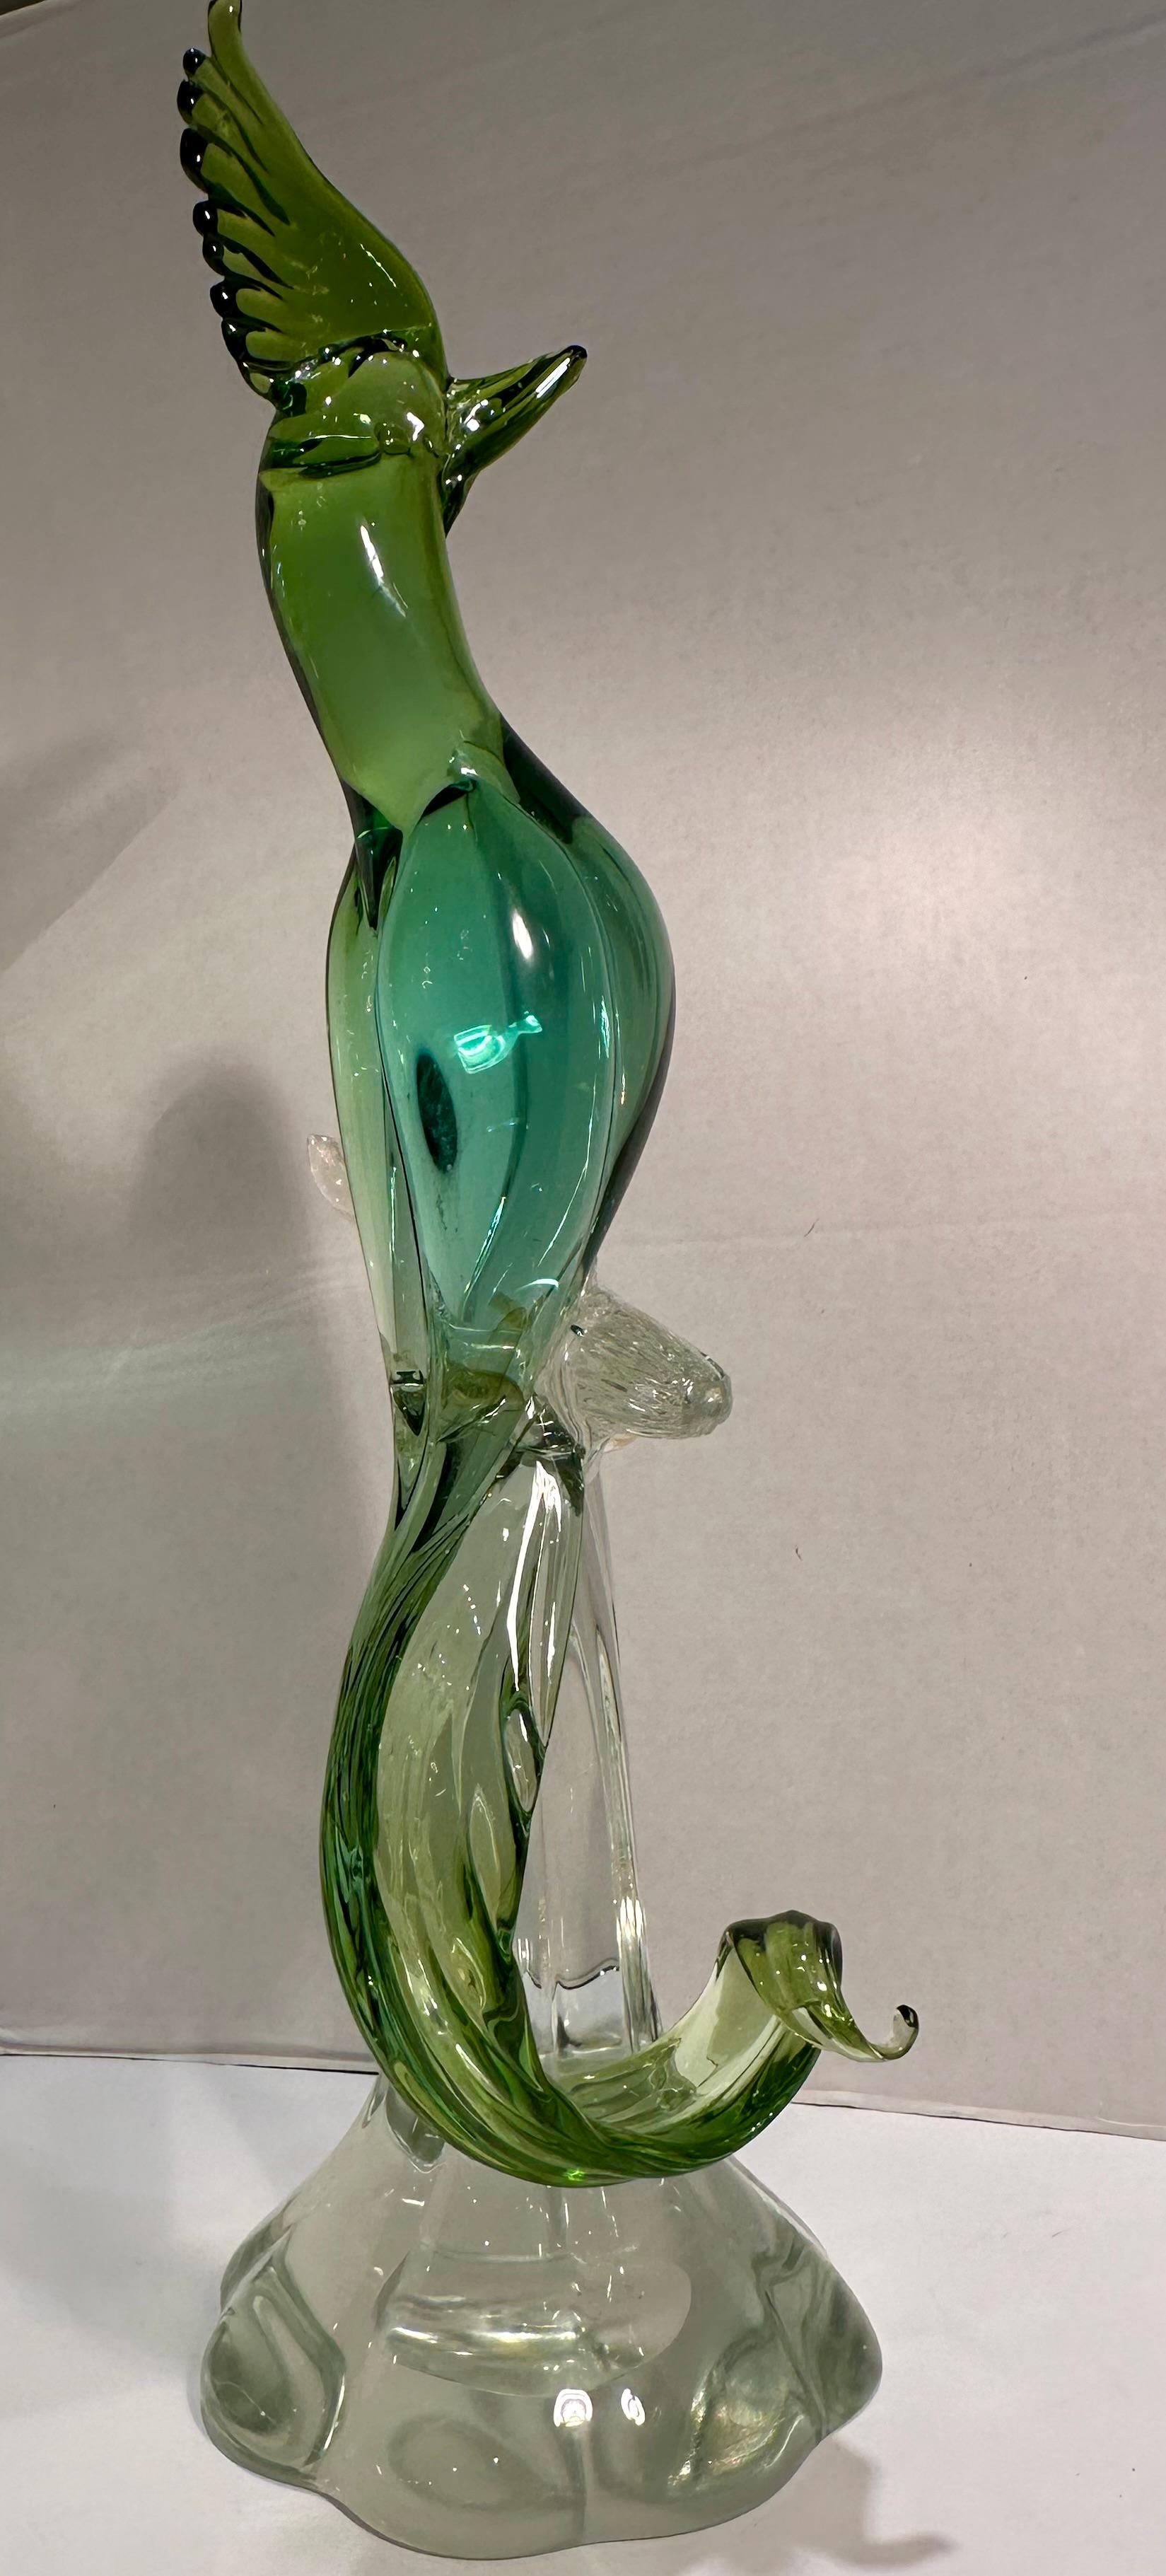  Large Salviati Italy Murano Glass Exotic Bird Figurine in Shades of Green  For Sale 6